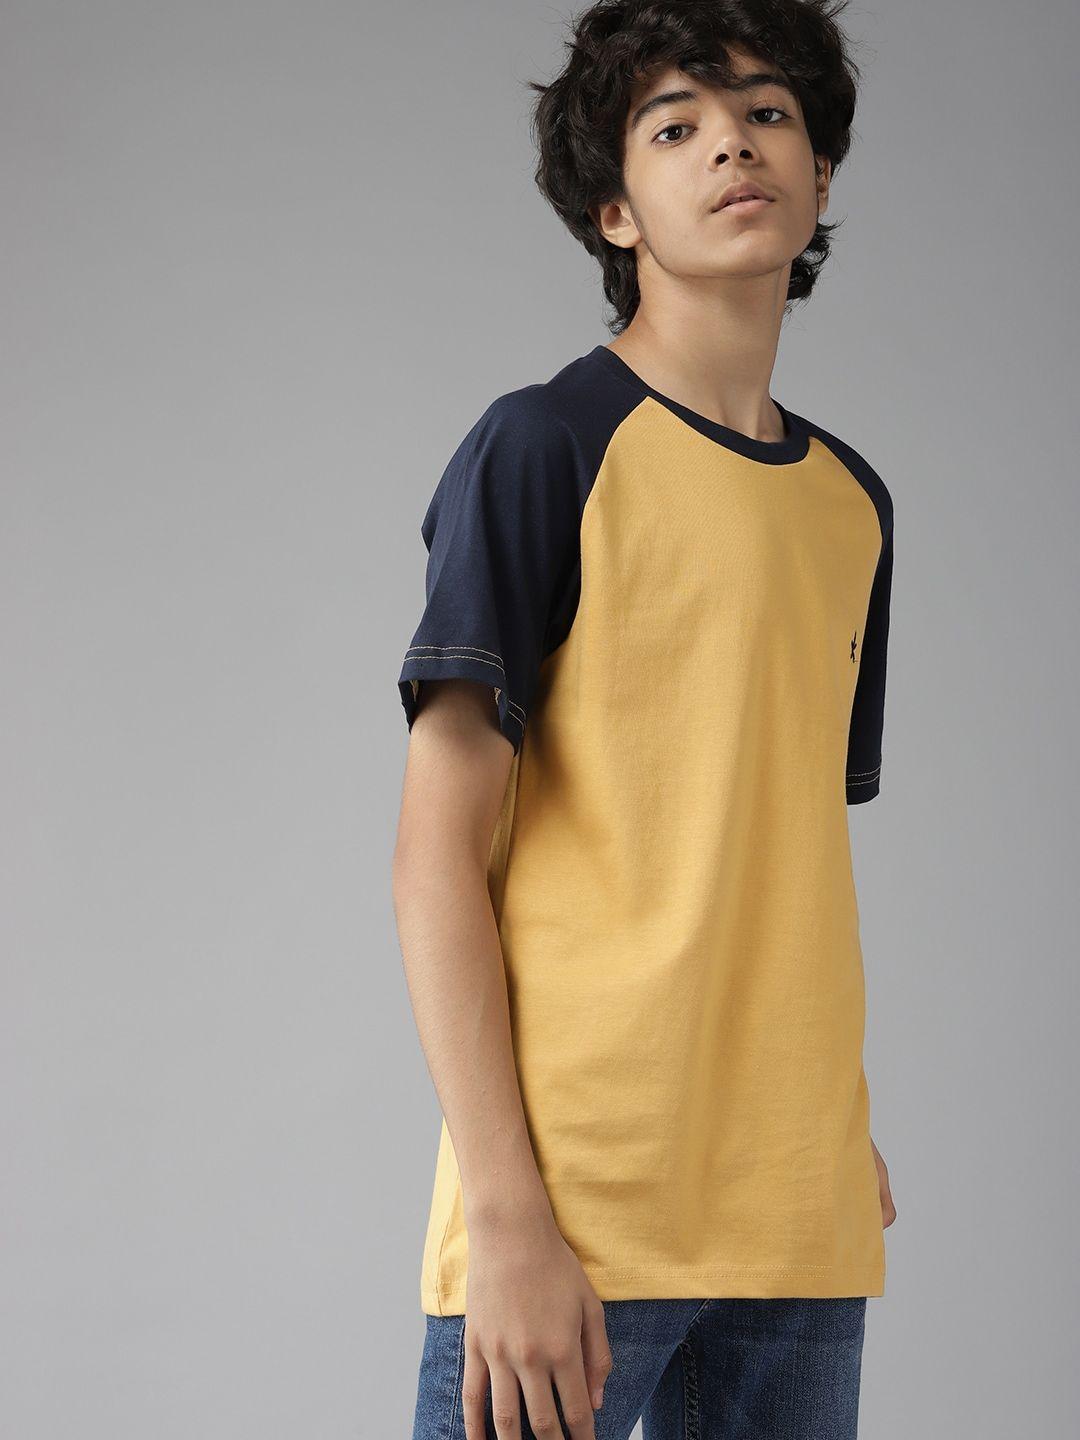 uth by roadster boys yellow & navy blue solid pure cotton t-shirt